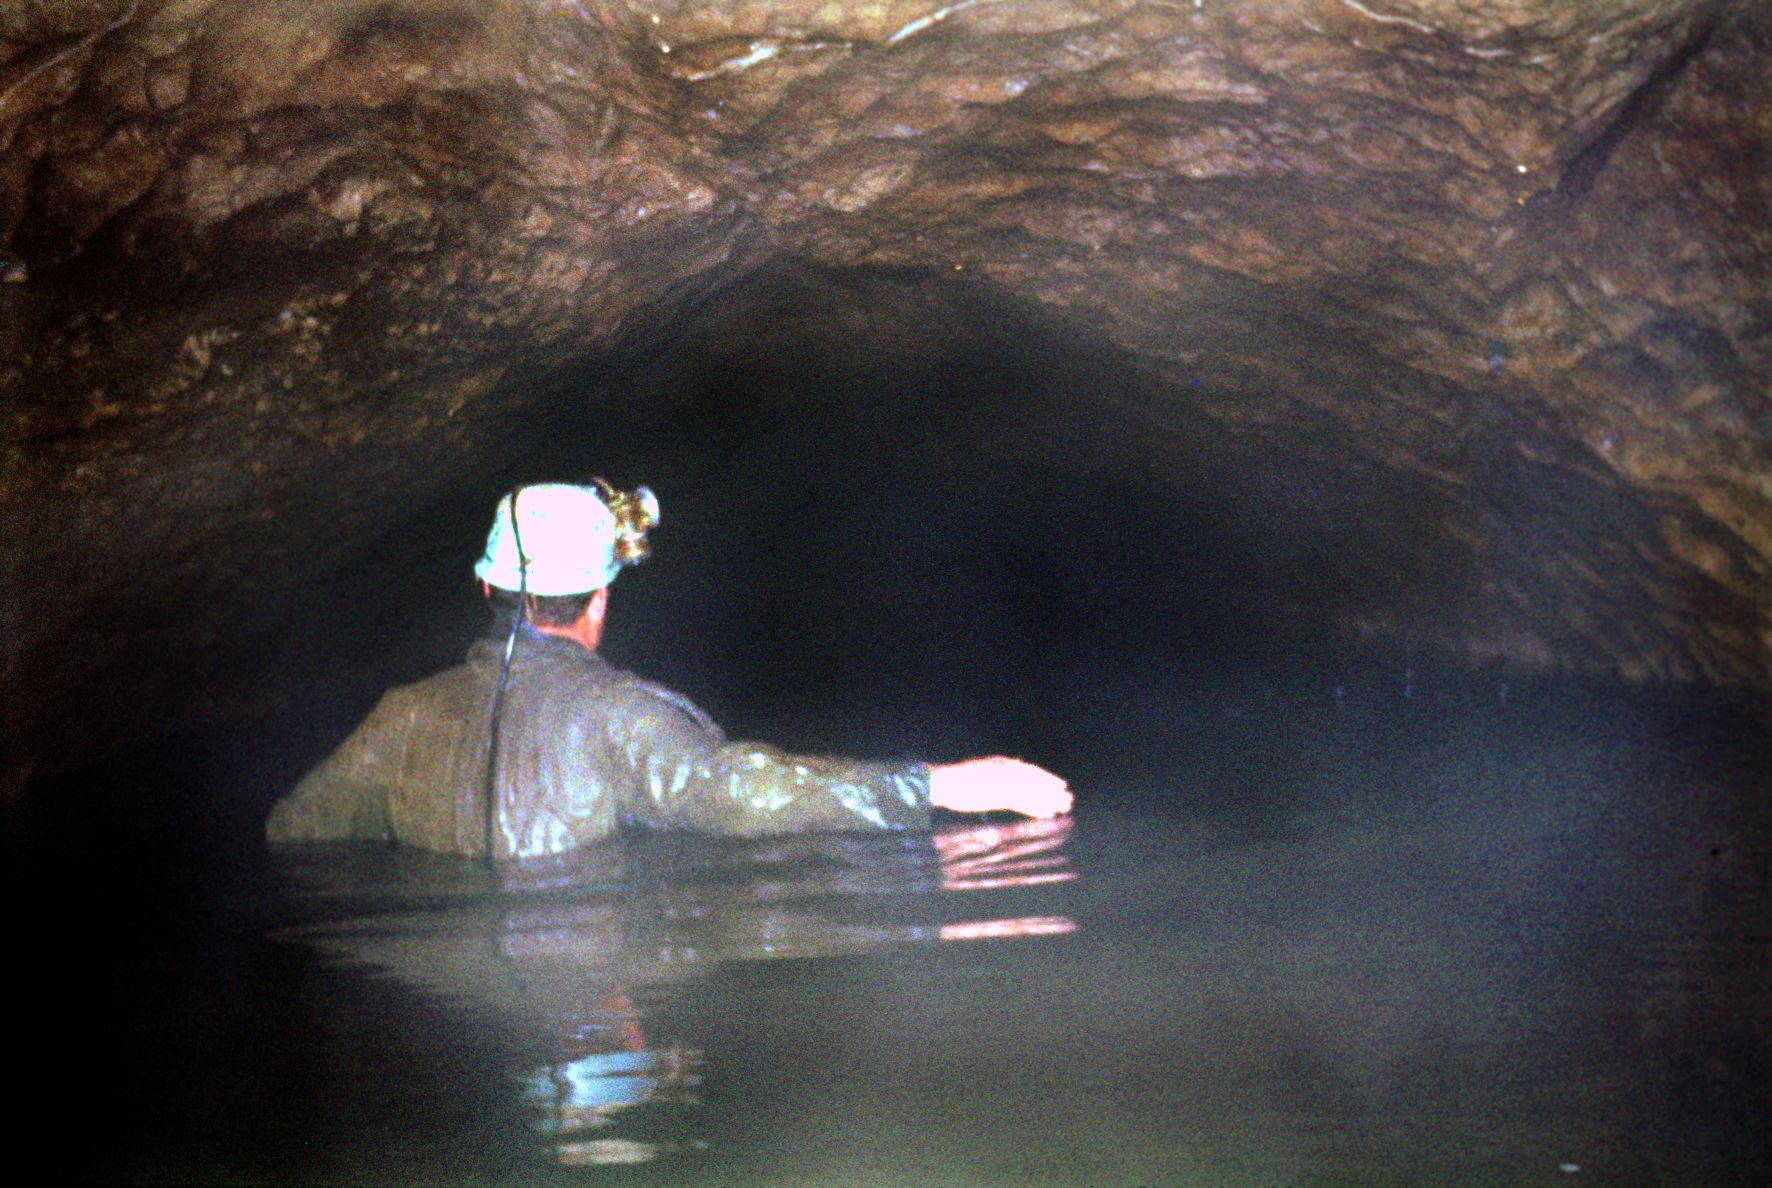 Michael Glanvill in upstream Kingsdale Master Cave 30th July 1968